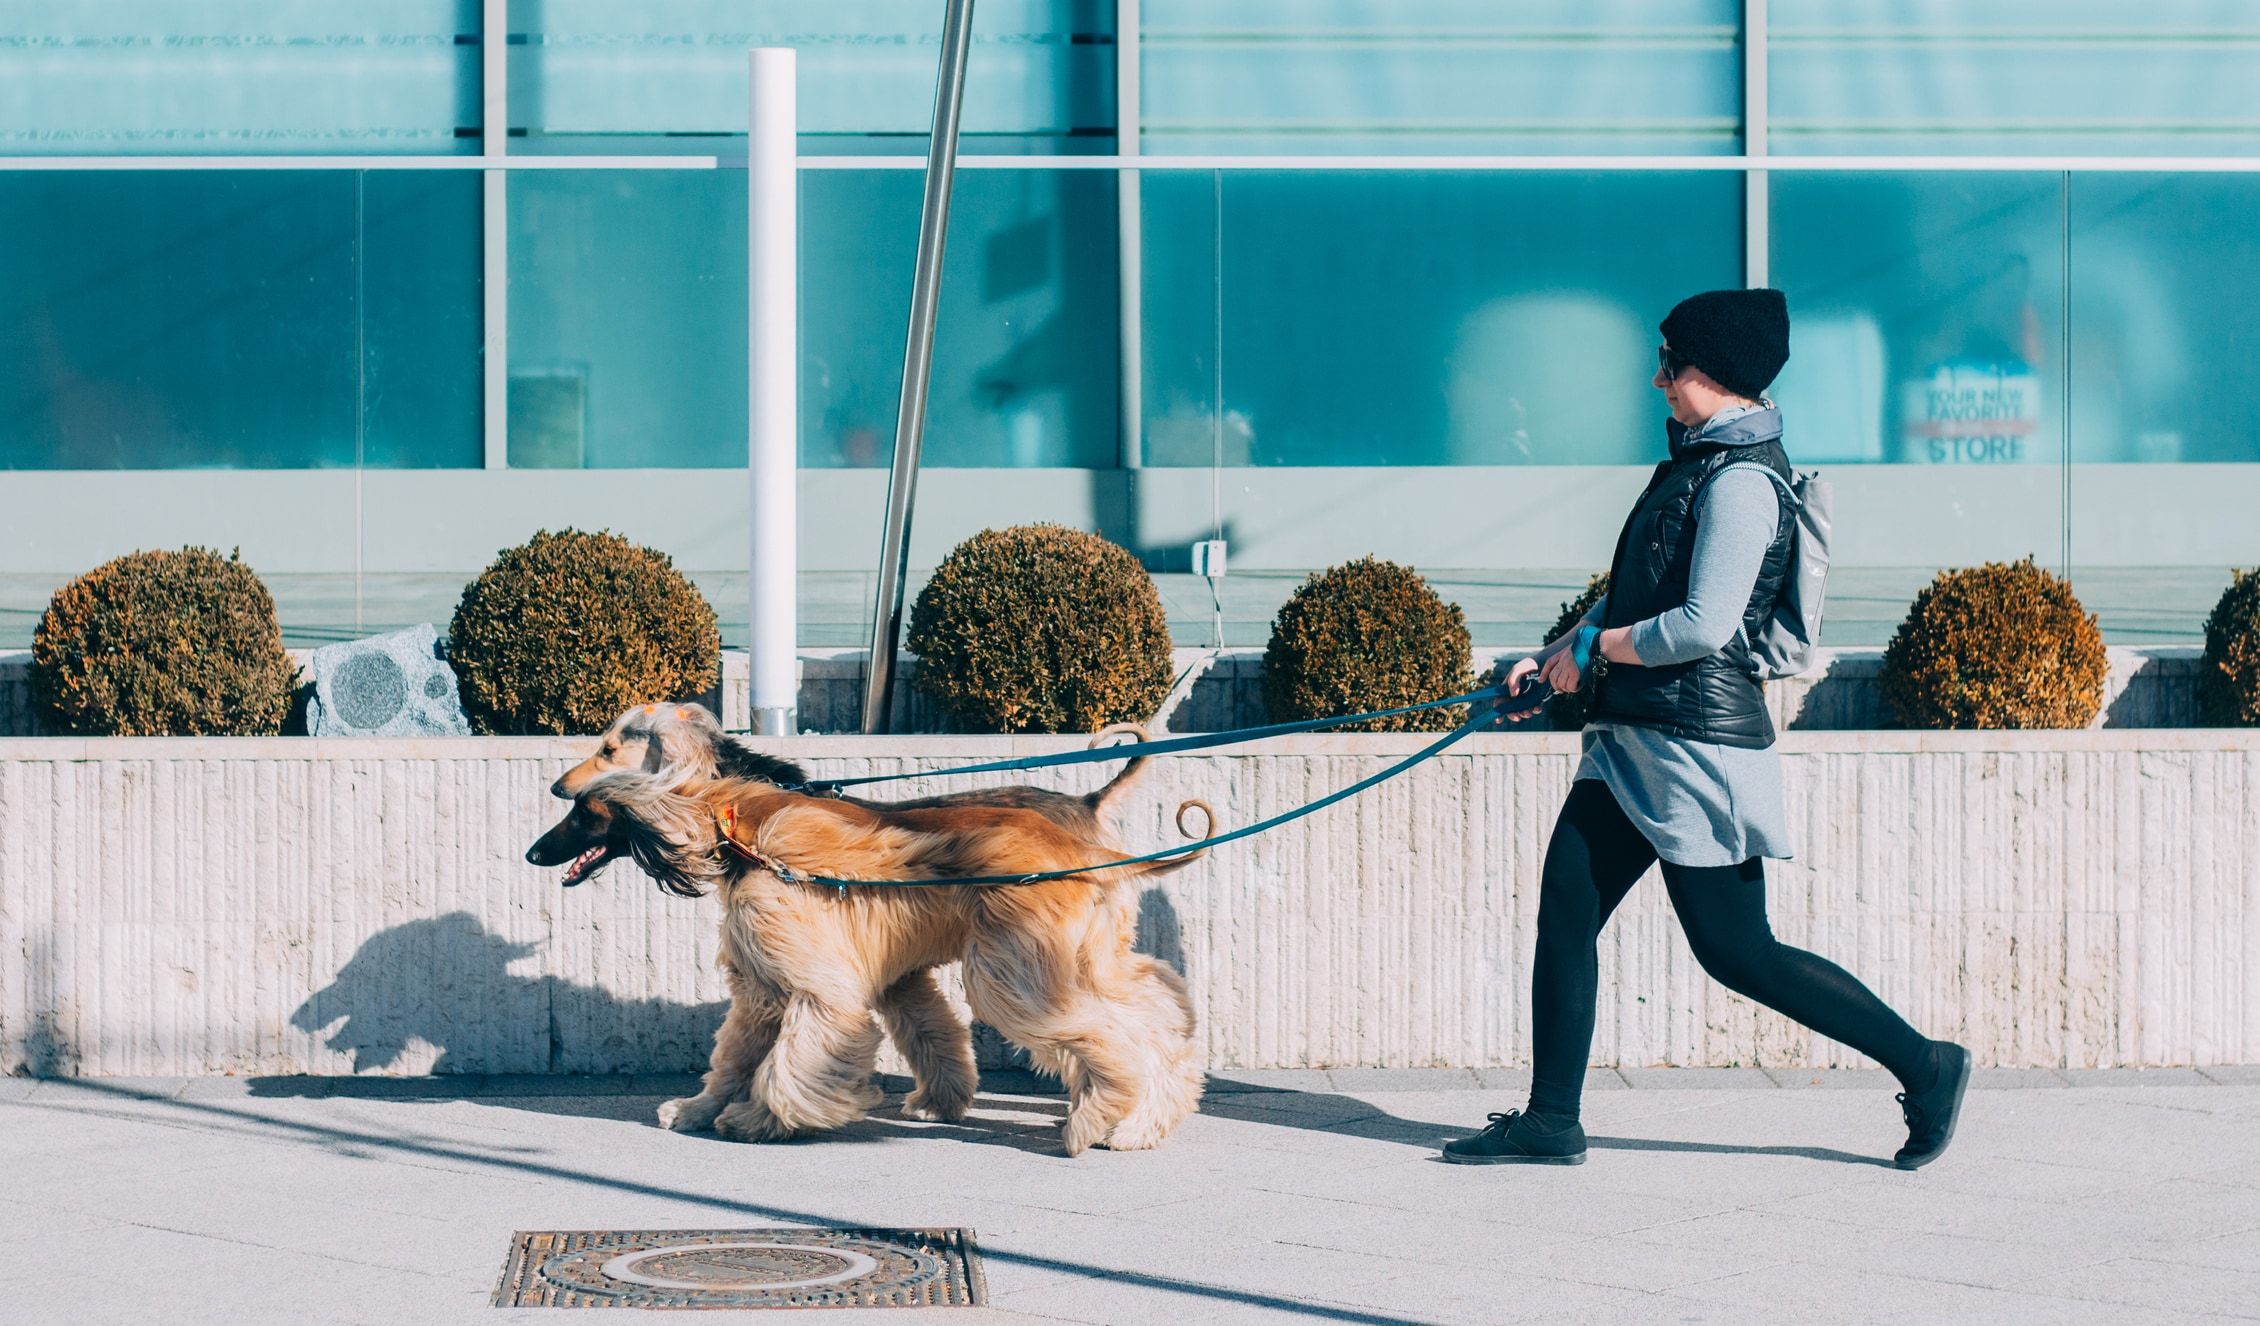 Dog walking rates: How much do dog walkers make?